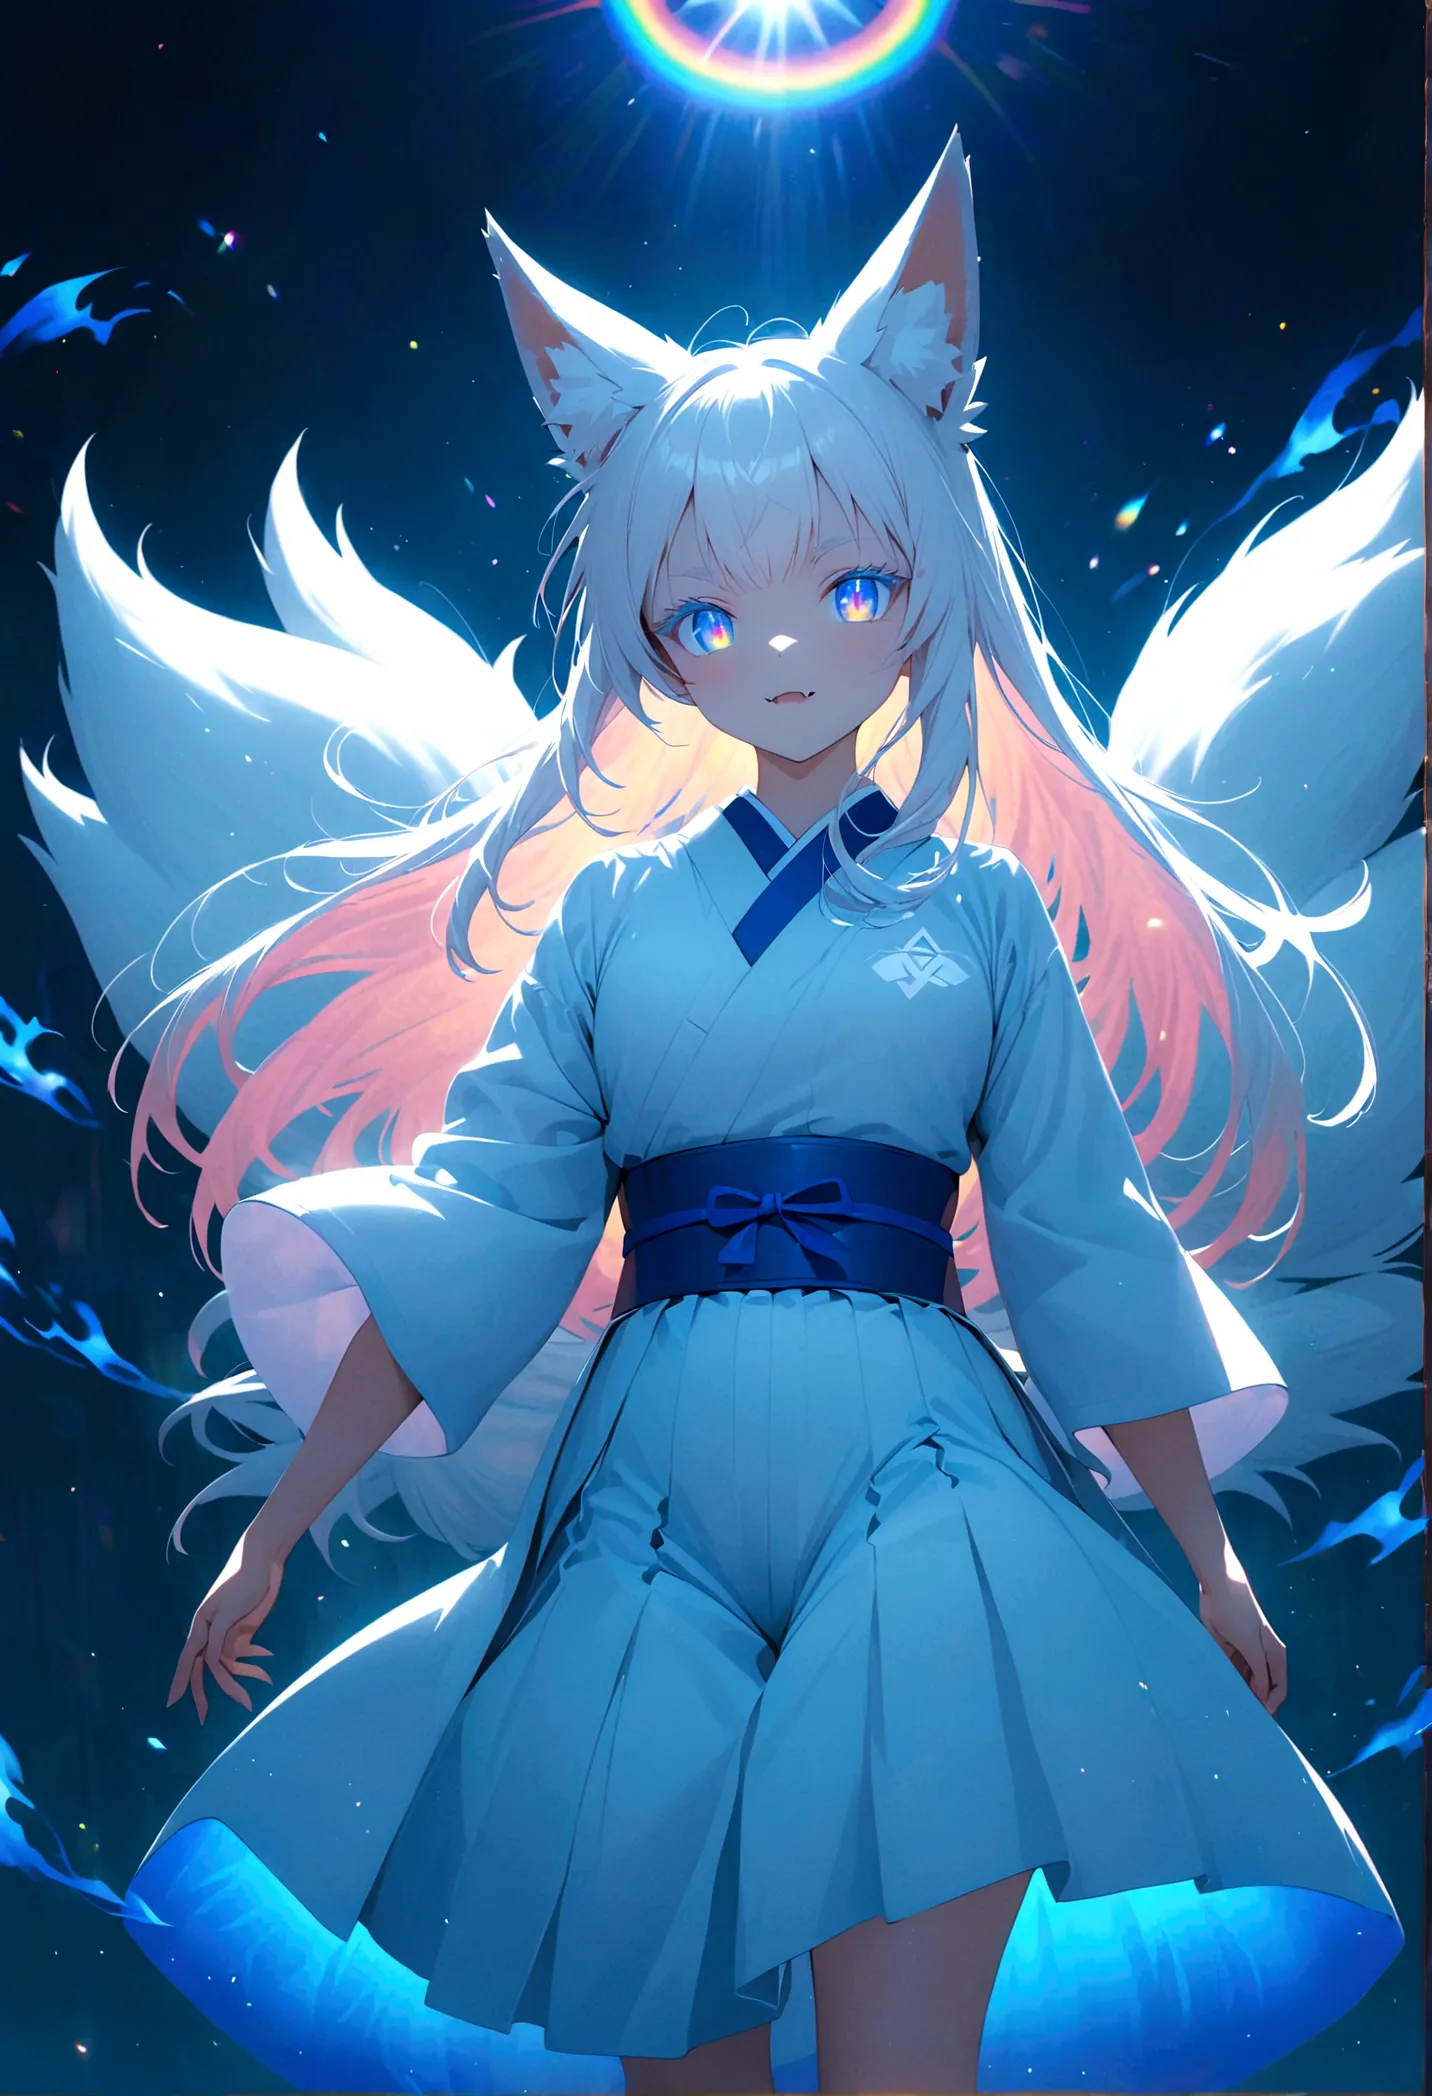 Anime girl with white long hair with white fox ears with rainbow coloured eyes and fox fangs wearing white hakama with blue belt...